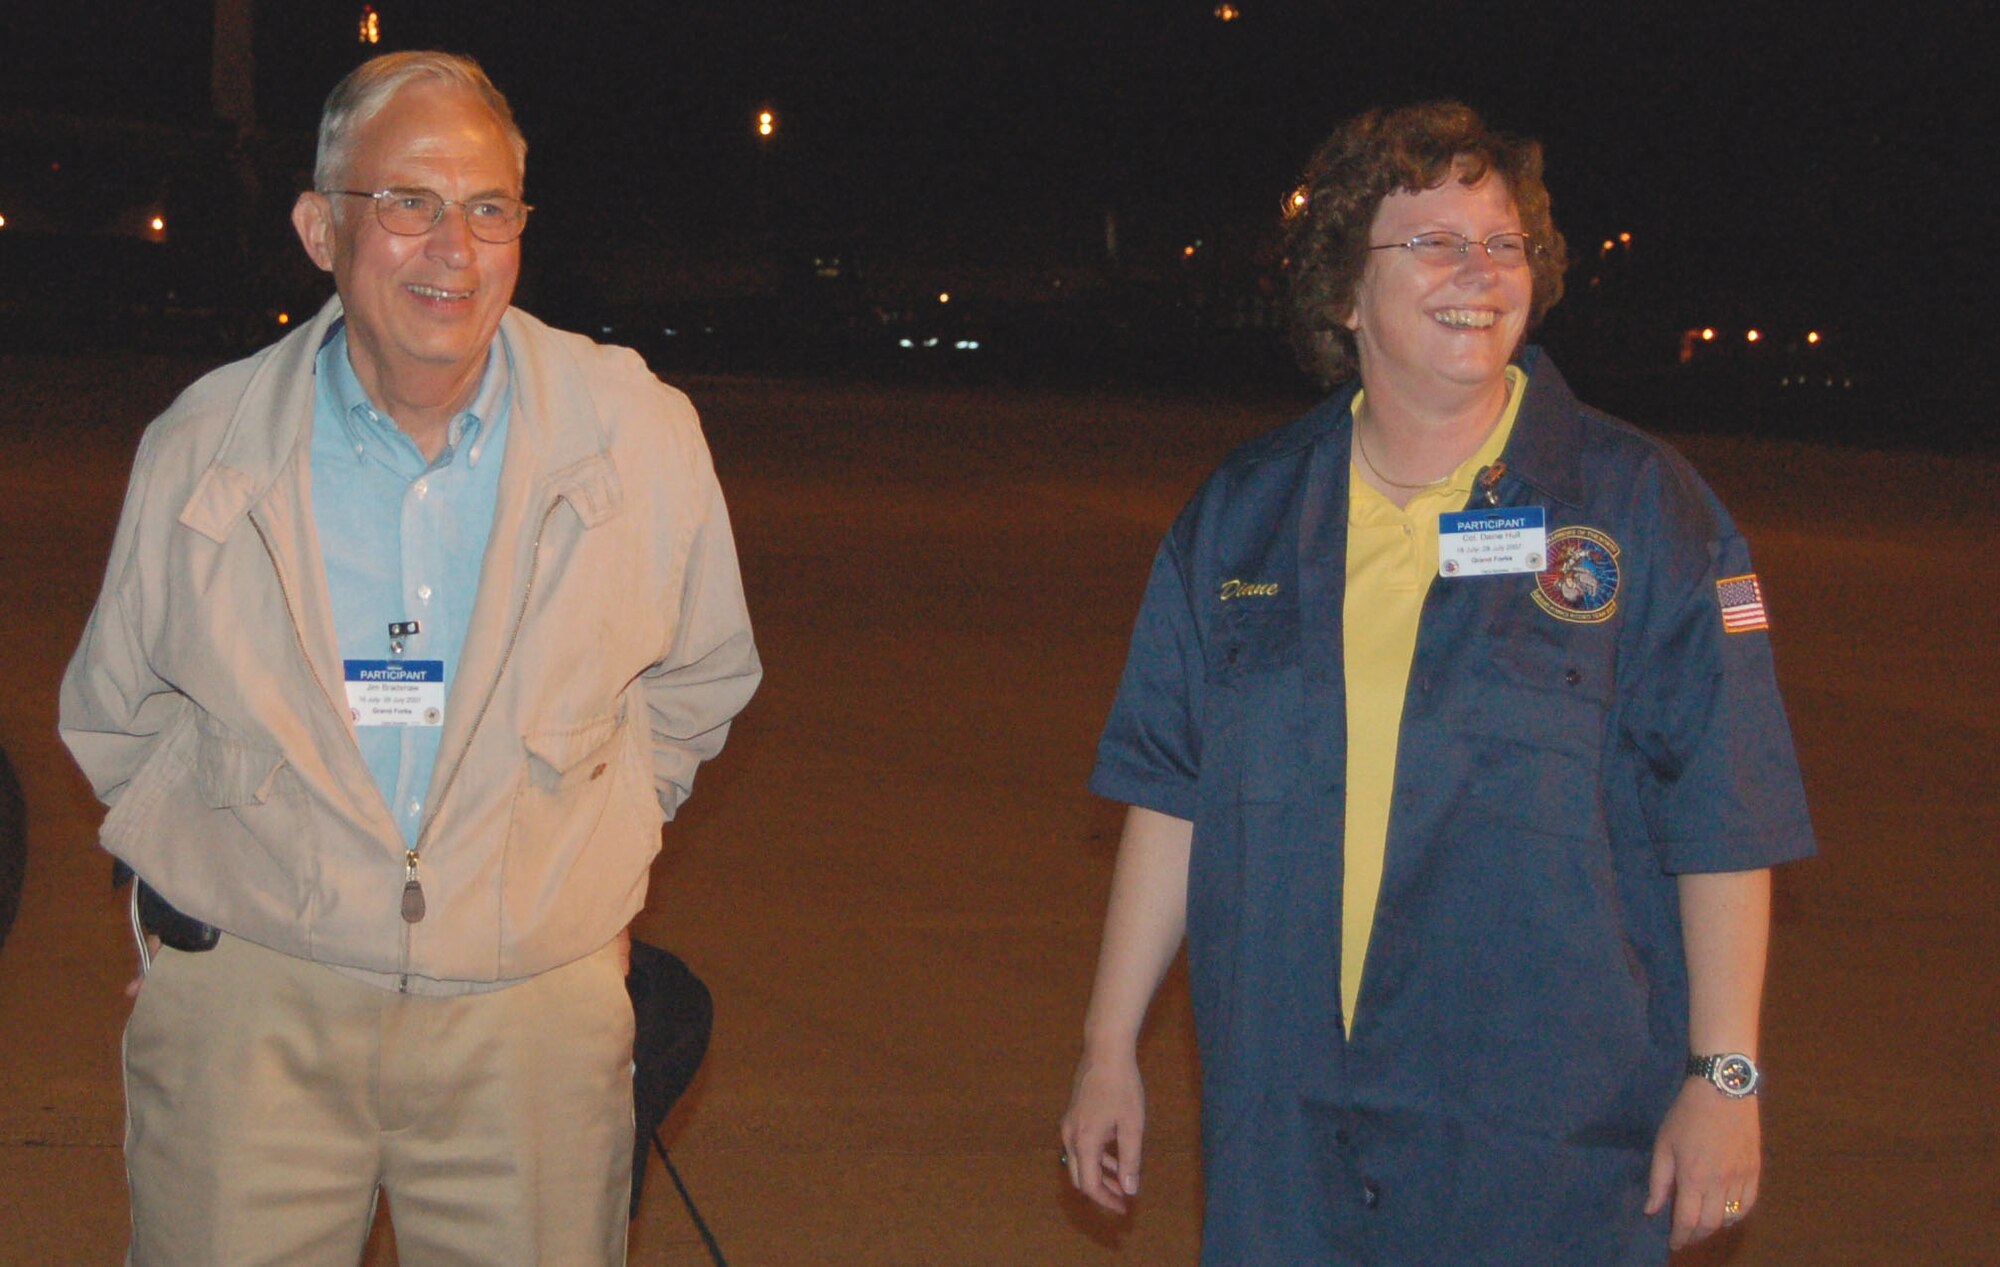 GRAND FORKS AIR FORCE BASE, N.D. - Col. Diane Hull, 319th Air Refueling Wing commander, stands next to Mr. Jim Bradshaw during the 2007 Air Mobility Command RODEO. Mr. Bradshaw is one of the community leaders who help foster good relationships between the wing and the Grand Cities. (U.S. Air Force photo/Staff Sgt. Amanda Callahan)